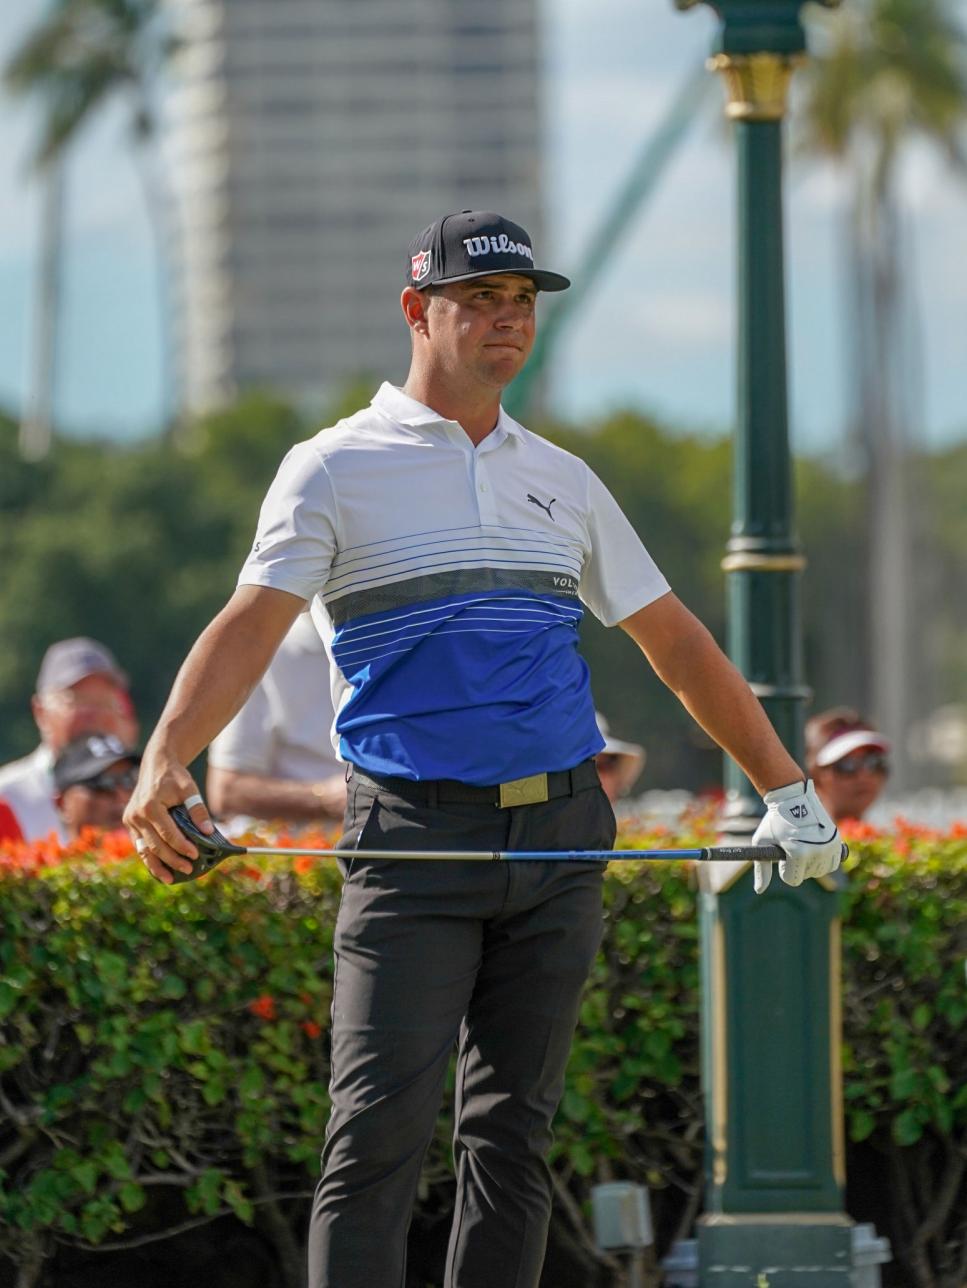 HONOLULU, HI - JANUARY 11: Gary Woodland watches his tee shot off the 1st hole during the second round of the Sony Open on January 11, 2019, at the Waialae Counrty Club in Honolulu, HI. (Photo by Darryl Oumi/Icon Sportswire via Getty Images)